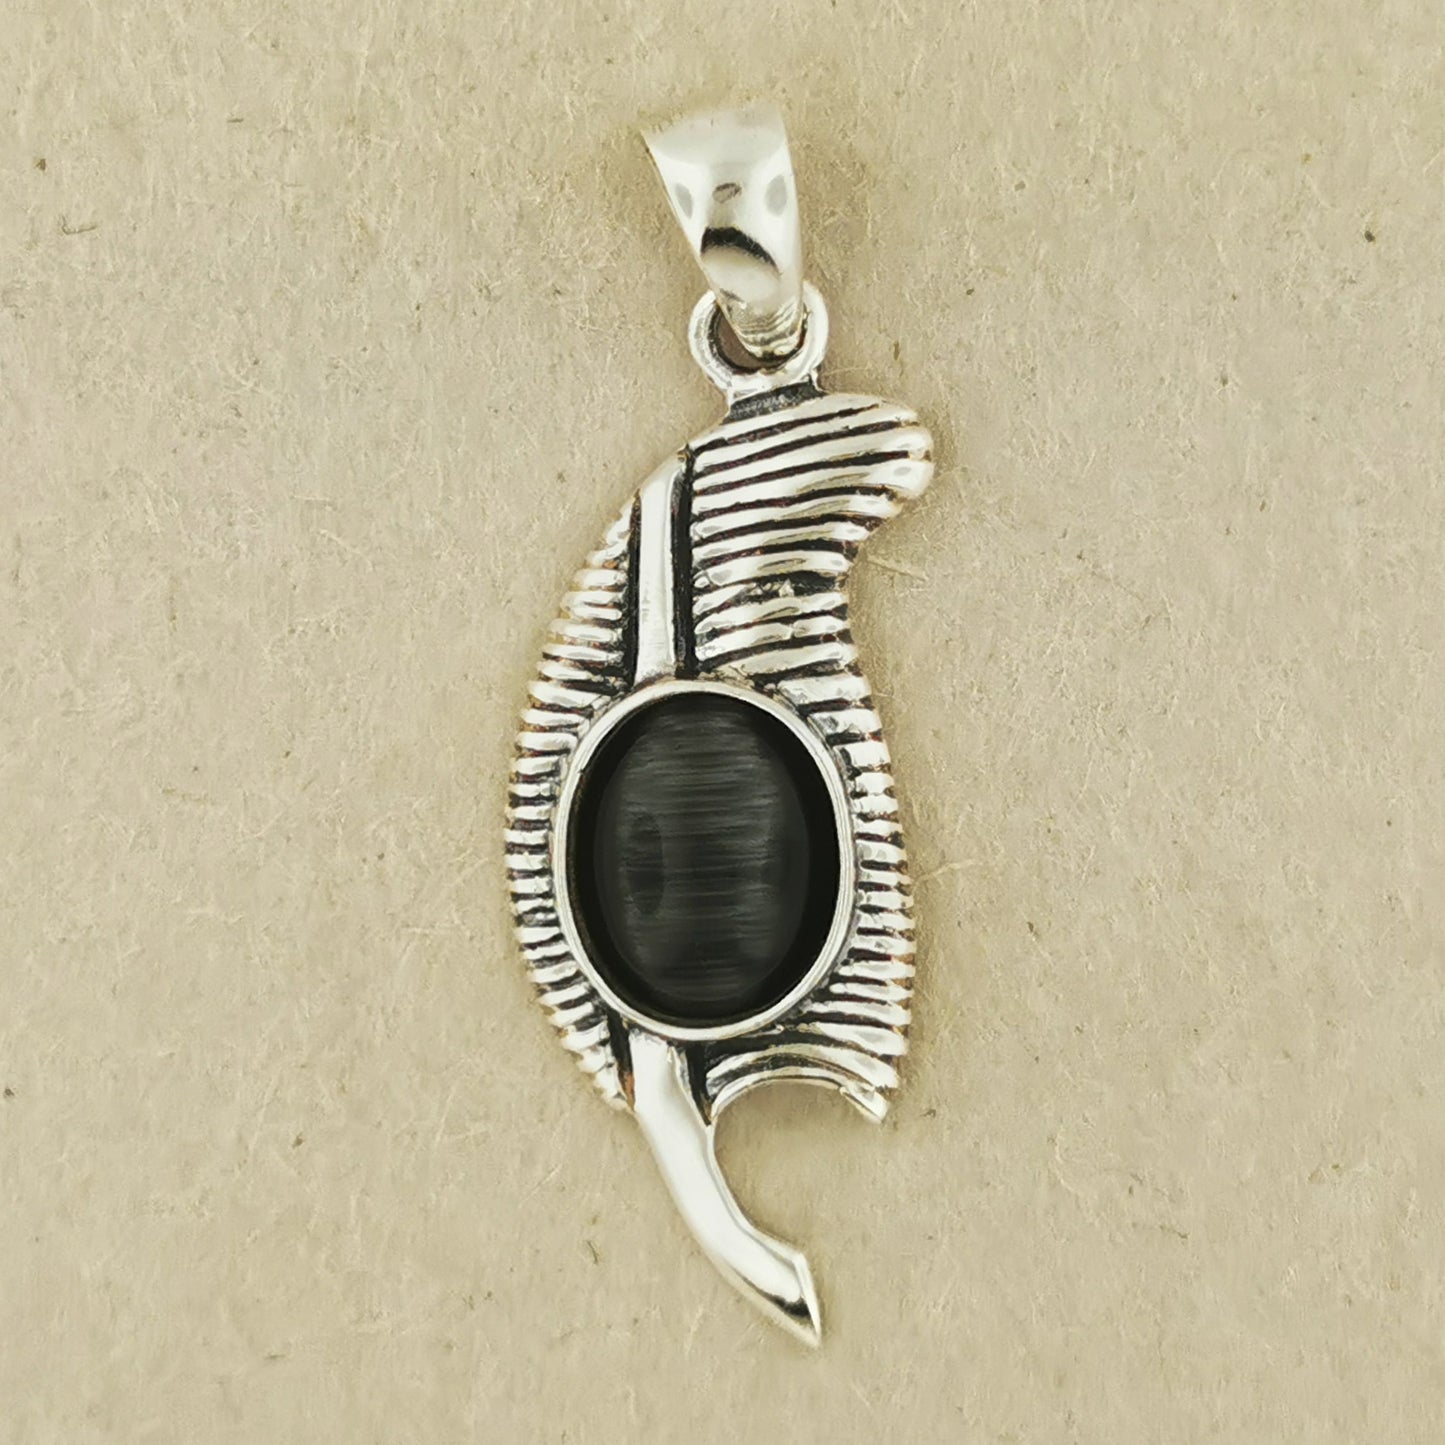 Feather of Ma'at Pendant in Sterling Silver with Cat's Eye Glass, Egyptian Feather Pendant, Egyptian Goddess Pendant, Goddess of Truth Pendant, Silver Egyptian Feather Pendant, Silver Ma’at Pendant, Egyptian Silver Pendant, Silver Gemstone Egyptian Feather Pendant